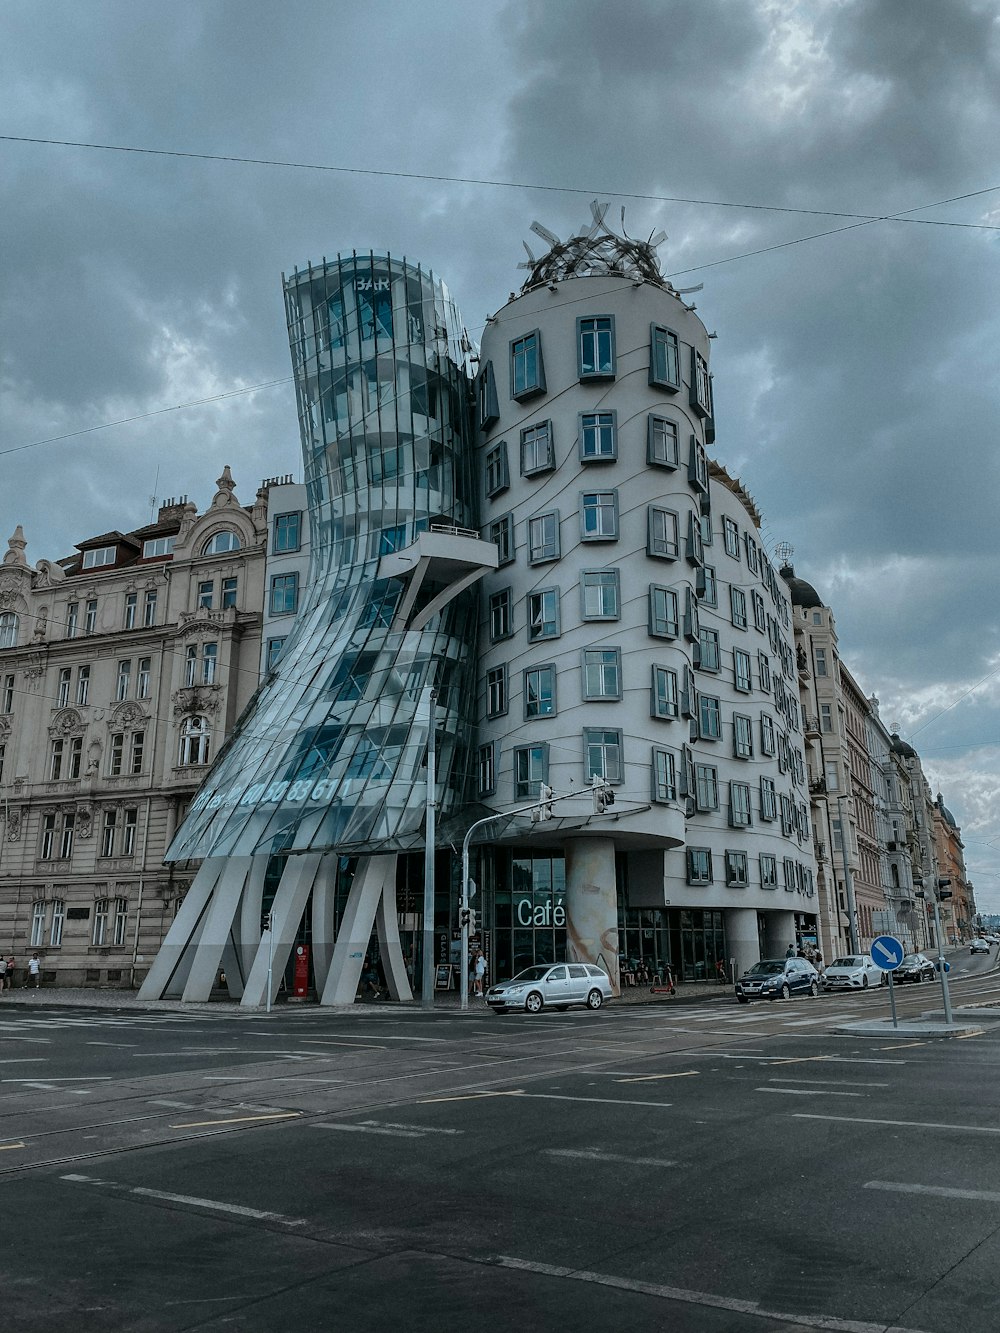 Dancing House with a glass tower